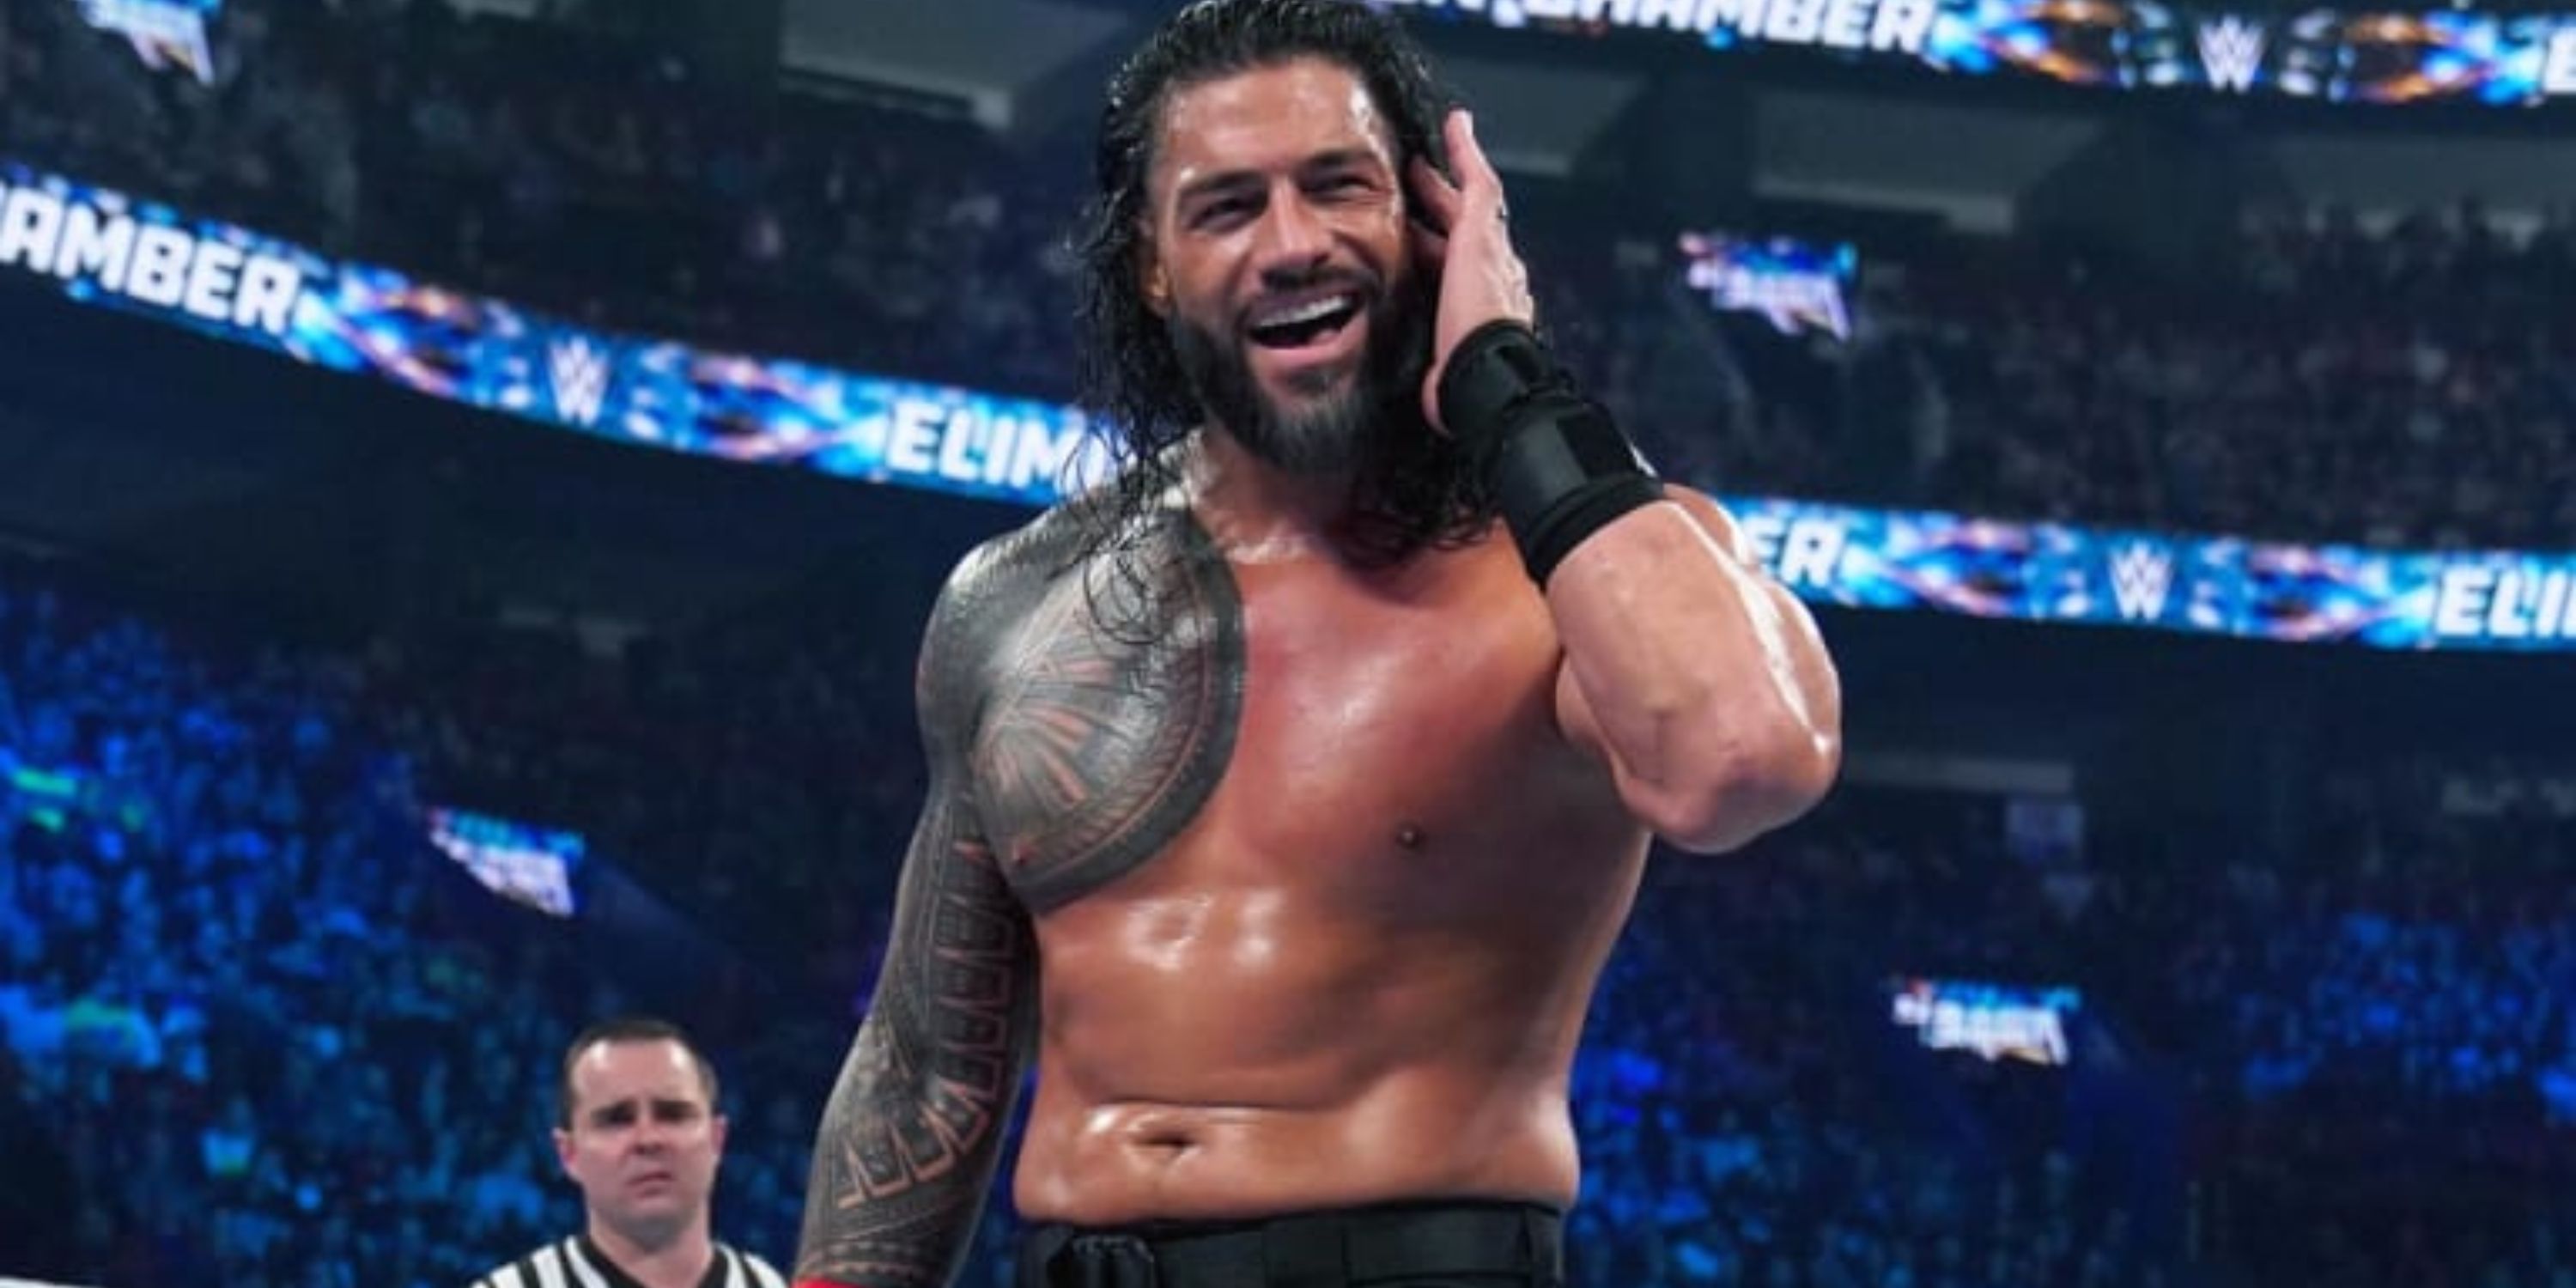 'Great' AEW star planned to return to WWE & face Roman Reigns at WrestleMania